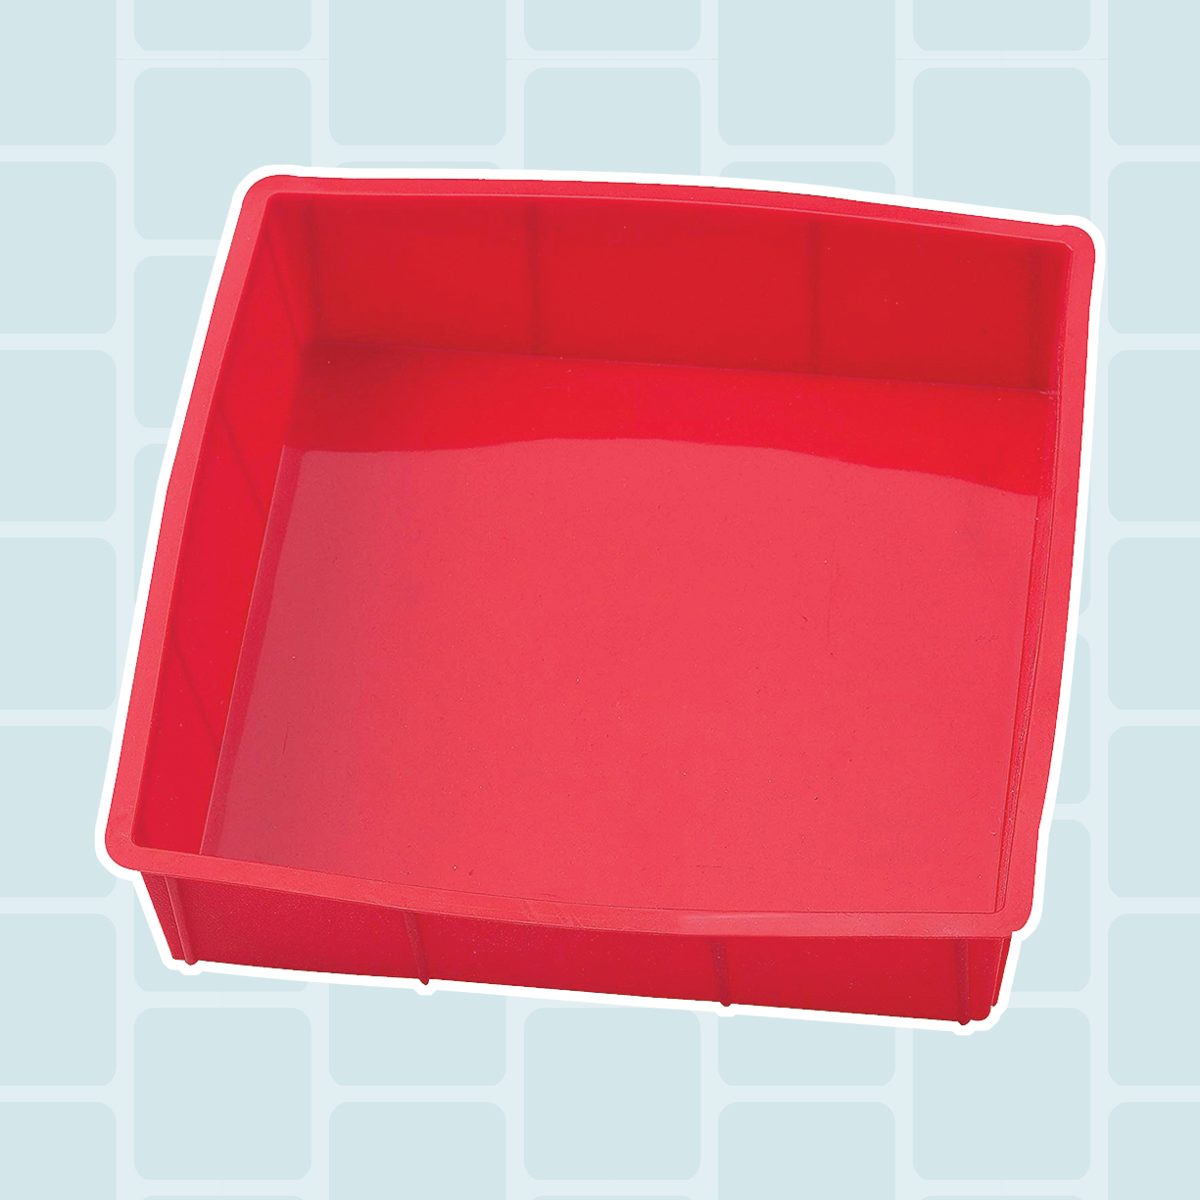 9-Inch Square Spring Form Pan